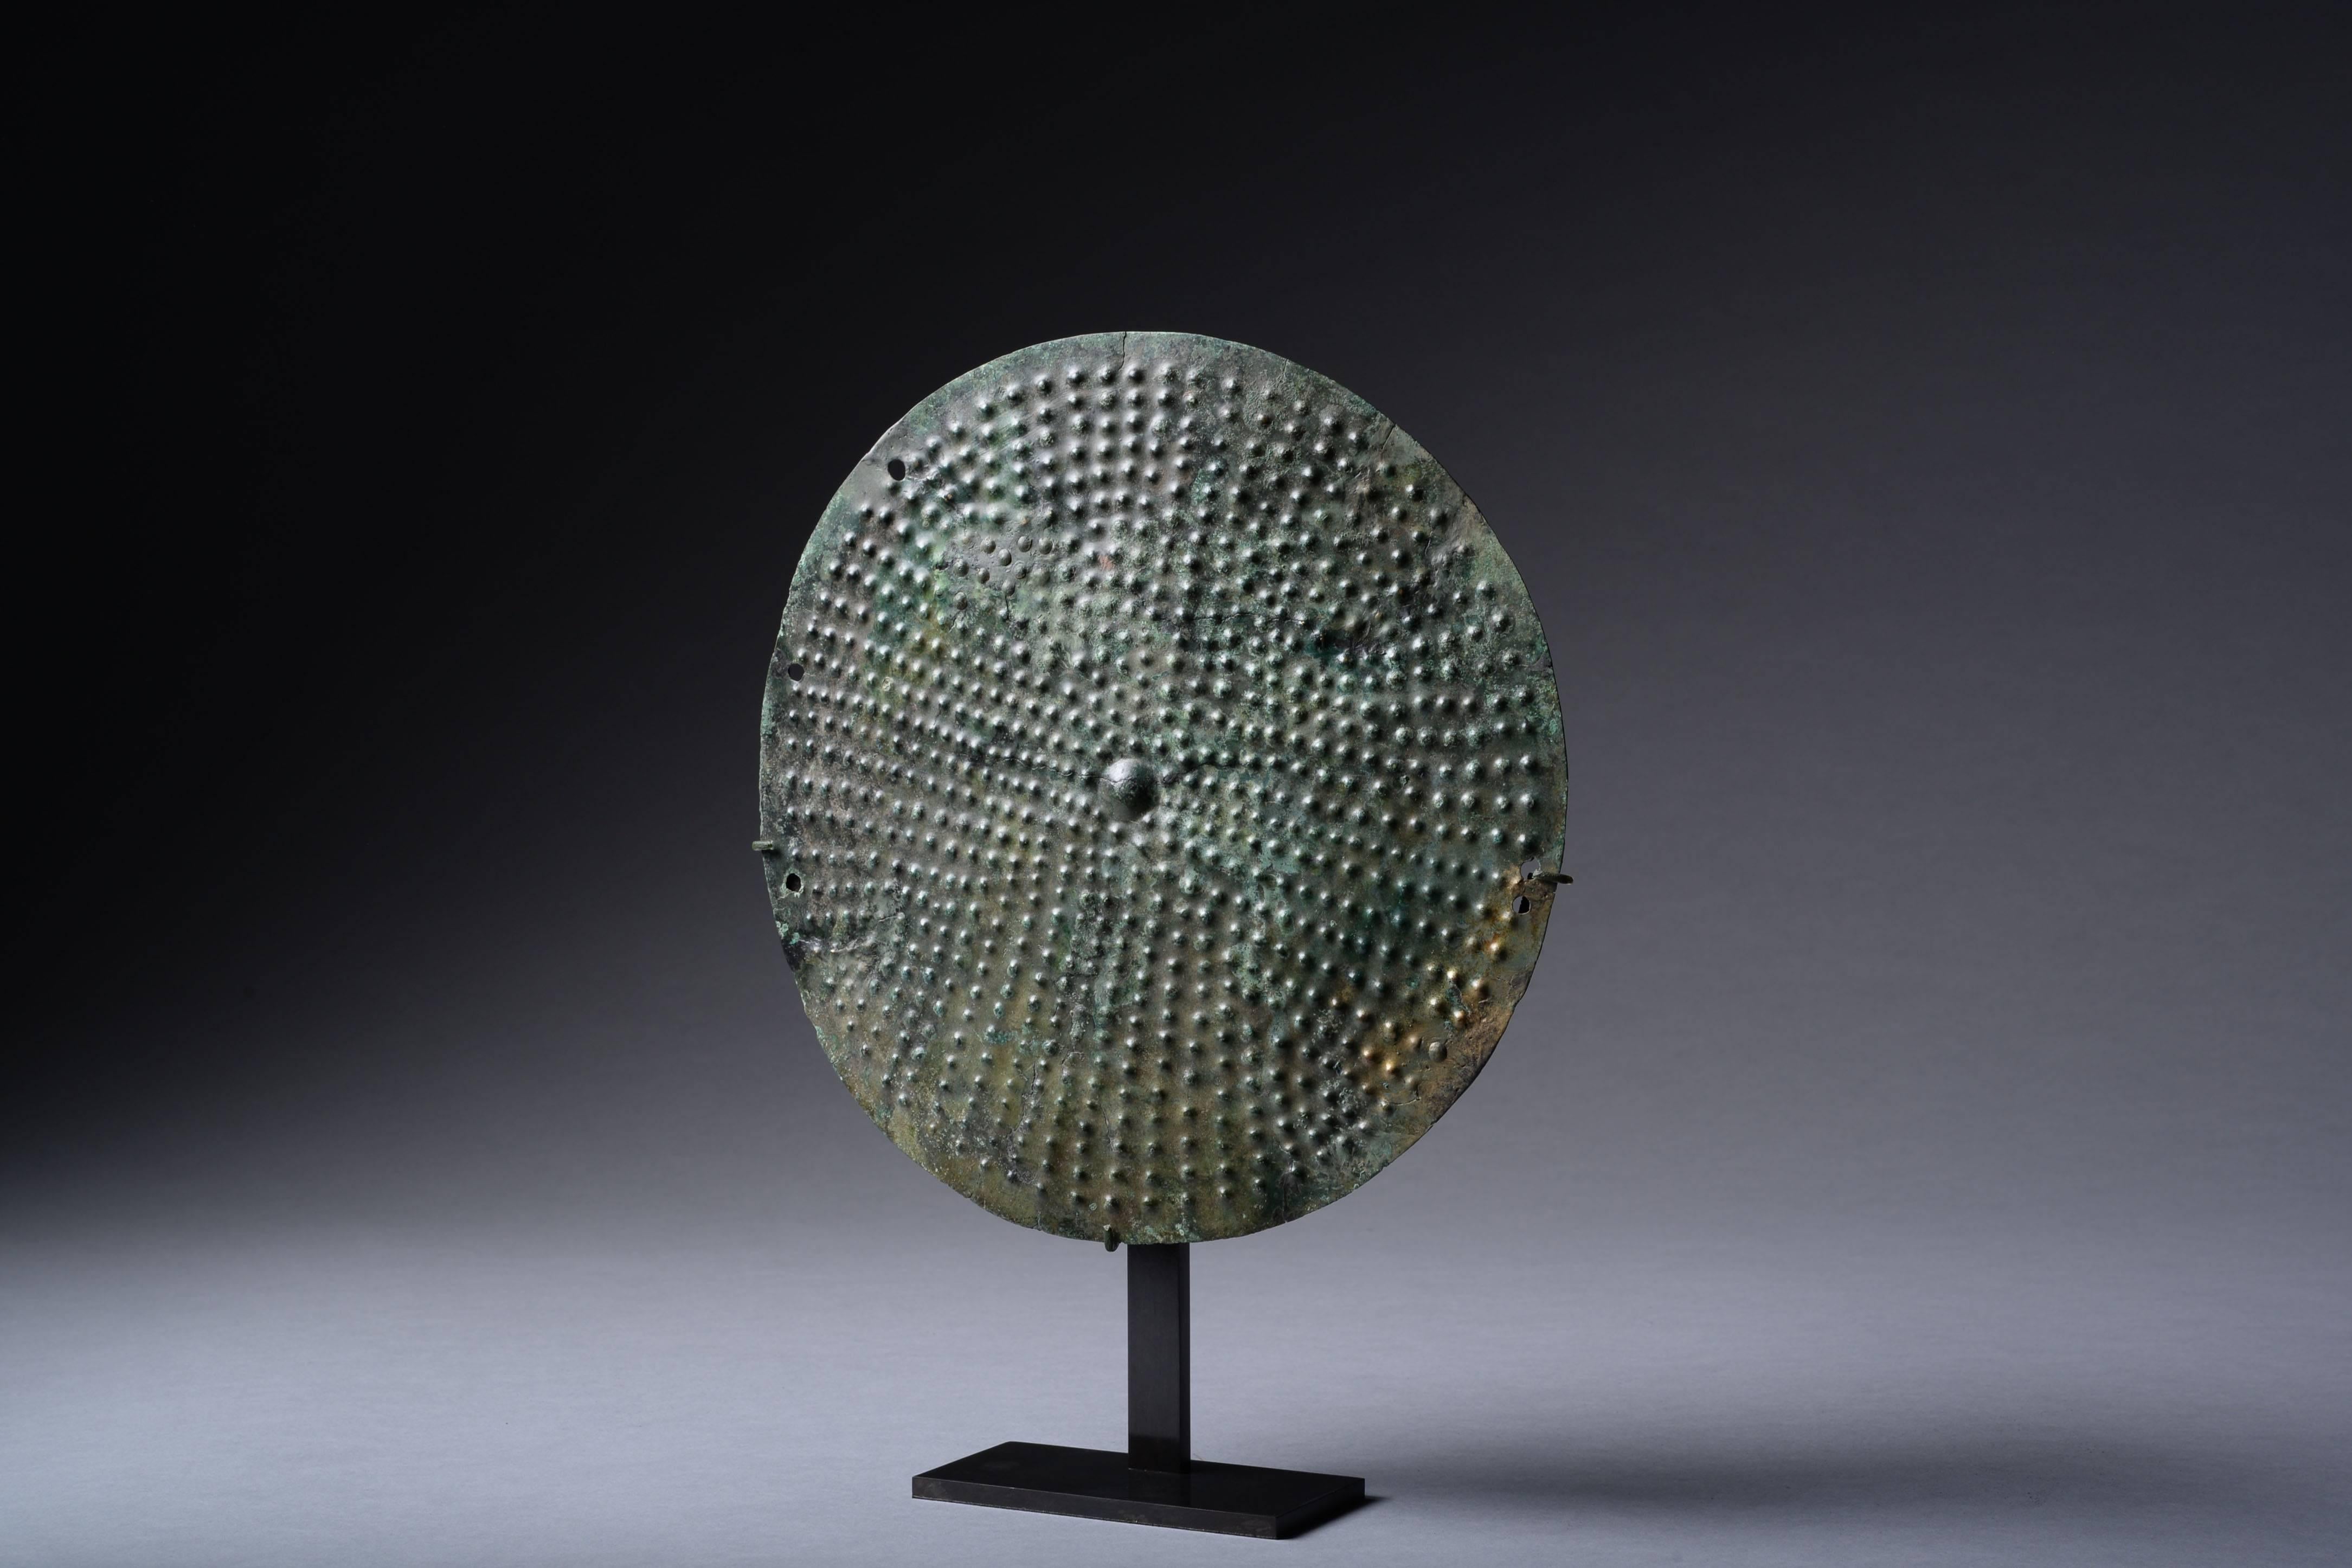 A rare ancient Etruscan shield boss, dating to the 7th - 6th century BC.

Hammered in positive relief from a sheet of bronze.

For a similar example on display at the Metropolitan Museum of Art, please see object 12.163.3, gallery 170.

 

A